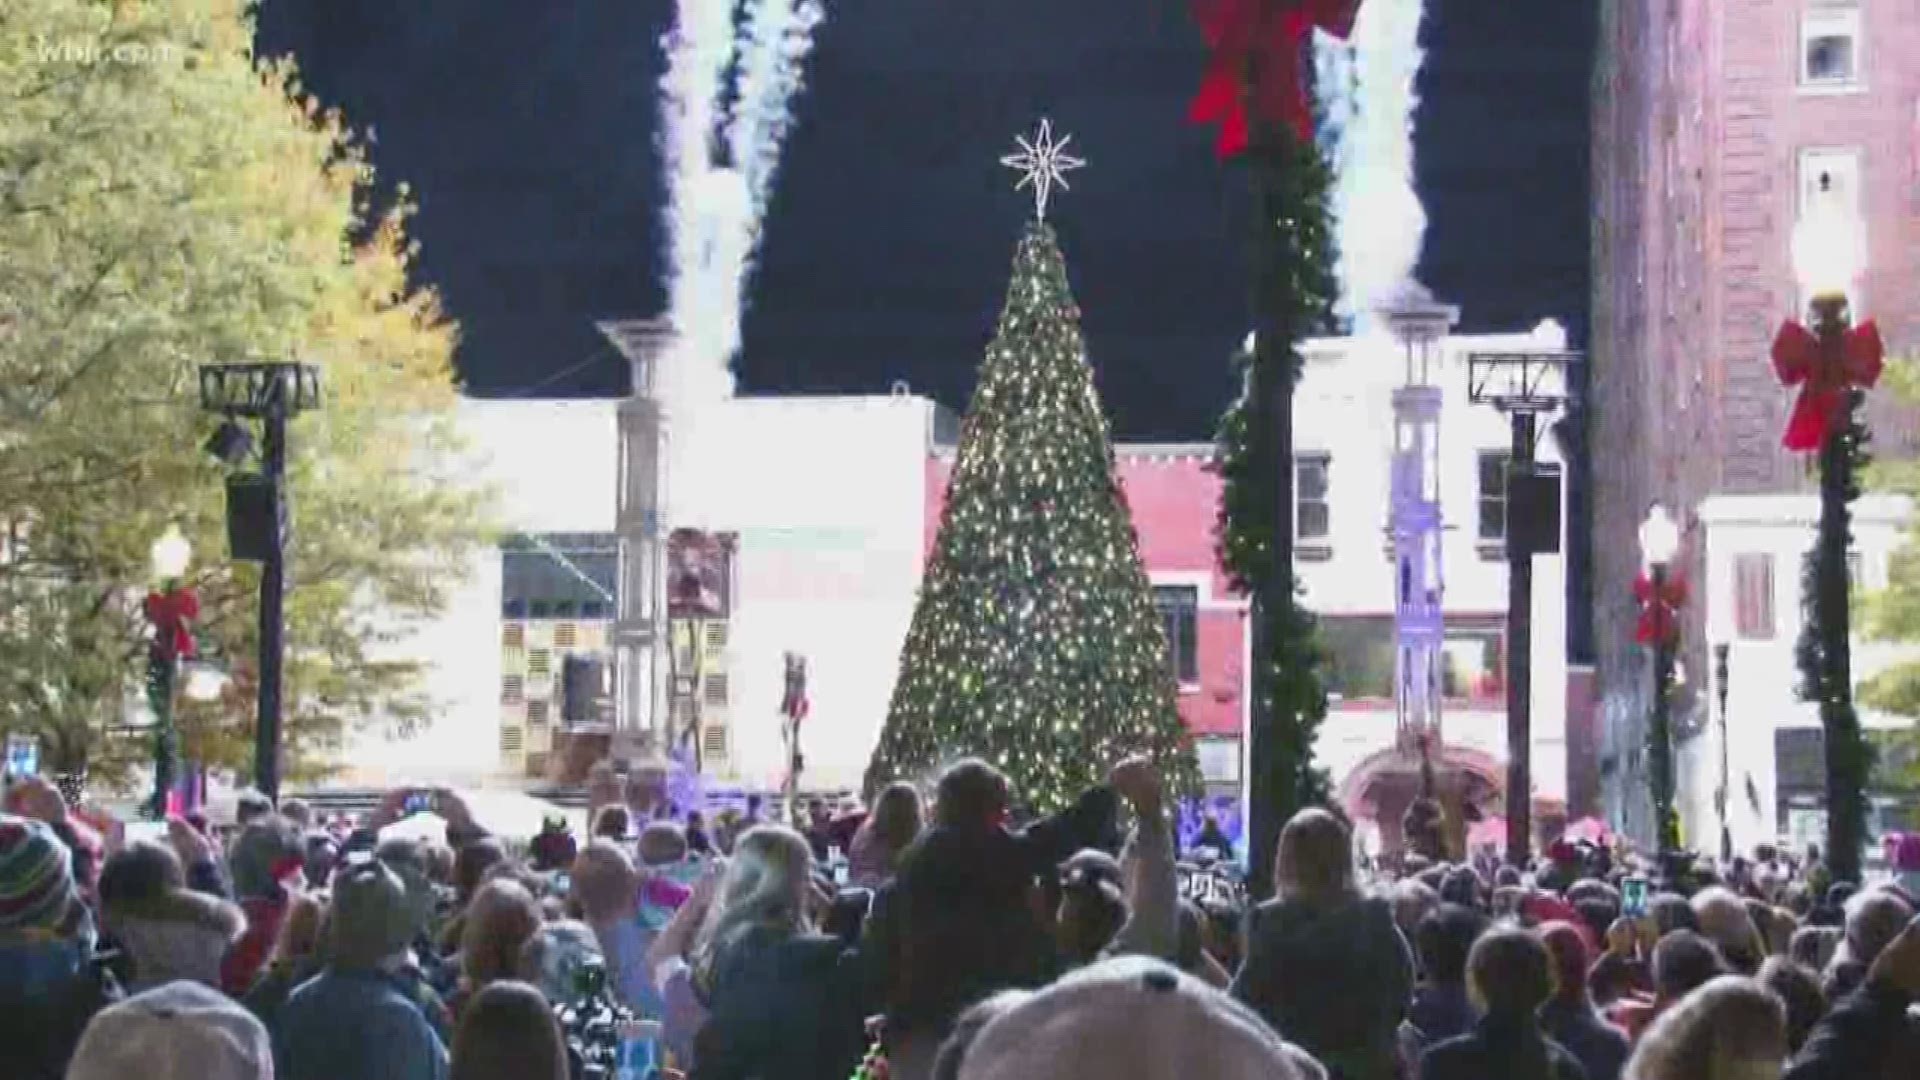 Christmas events across East Tennessee